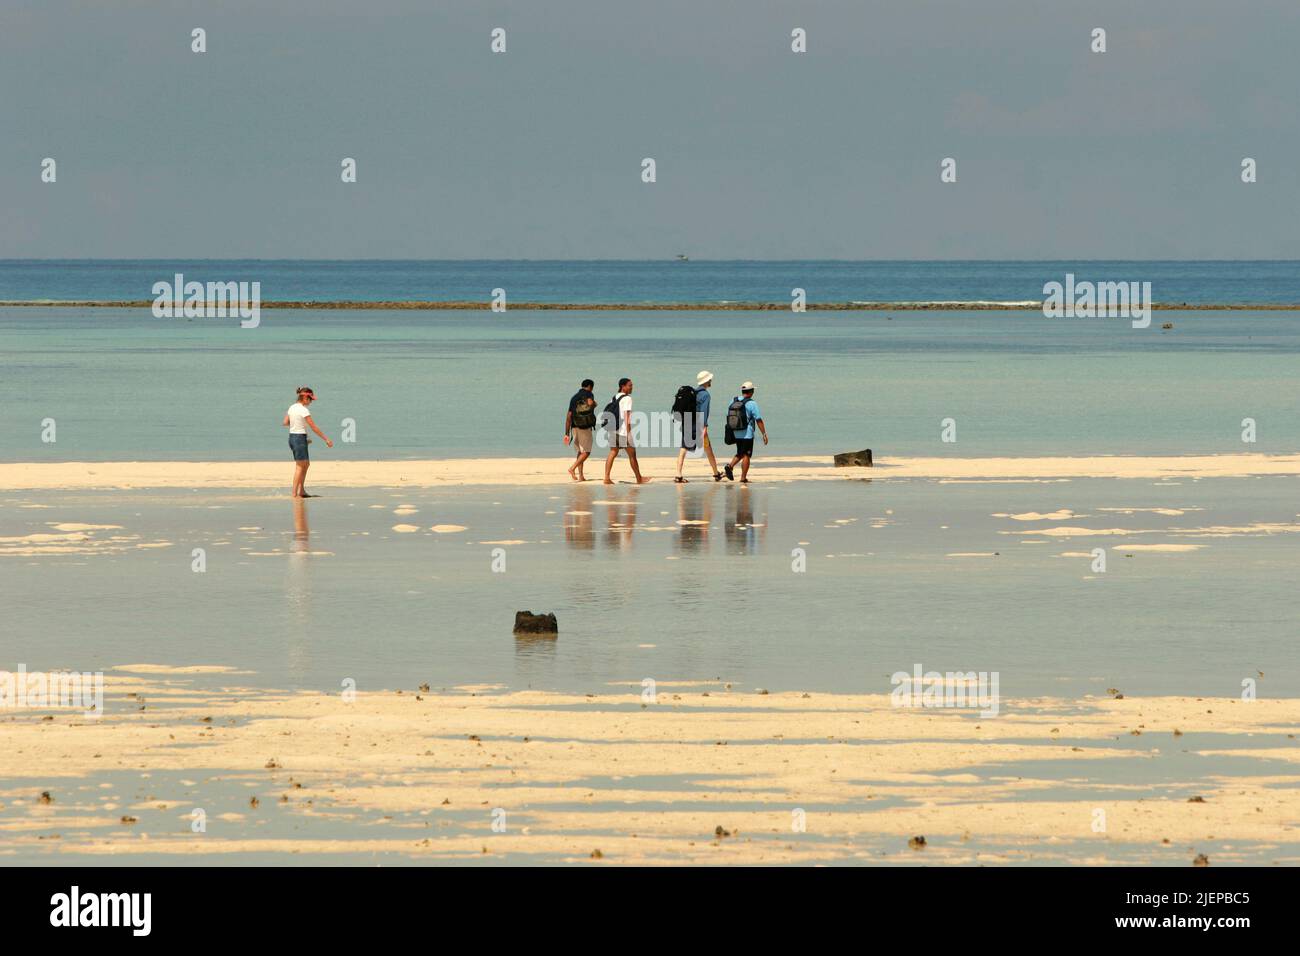 A group of visitors having recreational time during low tide on the flat sandy beach of Sangalaki Island, an island dedicated to sea turtle conservation and a part of of Berau Marine Protected Area within Derawan archipelago in Berau, East Kalimantan, Indonesia. Stock Photo